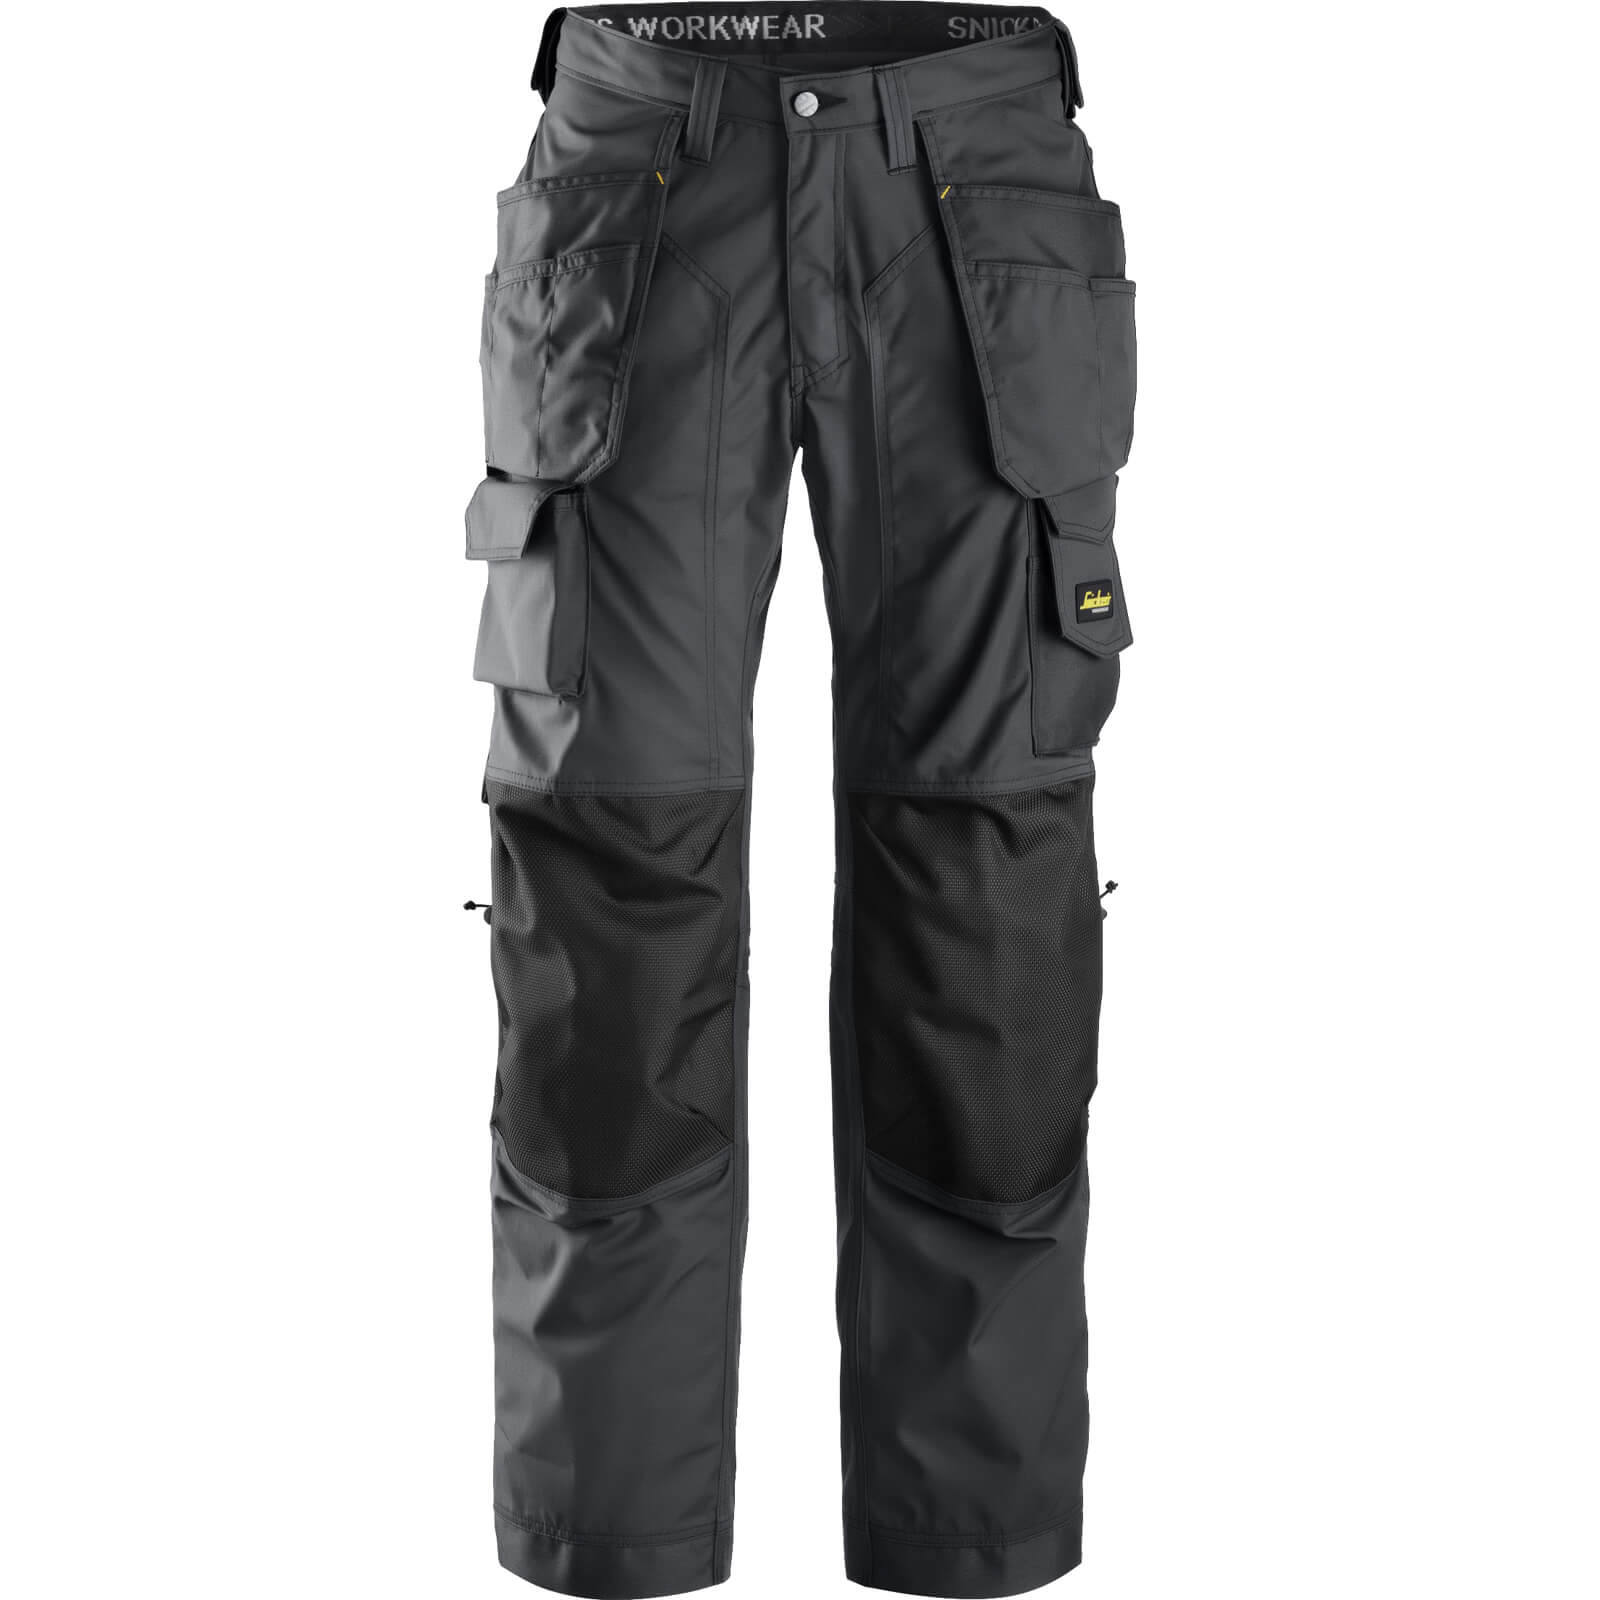 Image of Snickers 3223 Mens Rip Stop Floor Layer Work Trousers Black / Grey 30" 30"